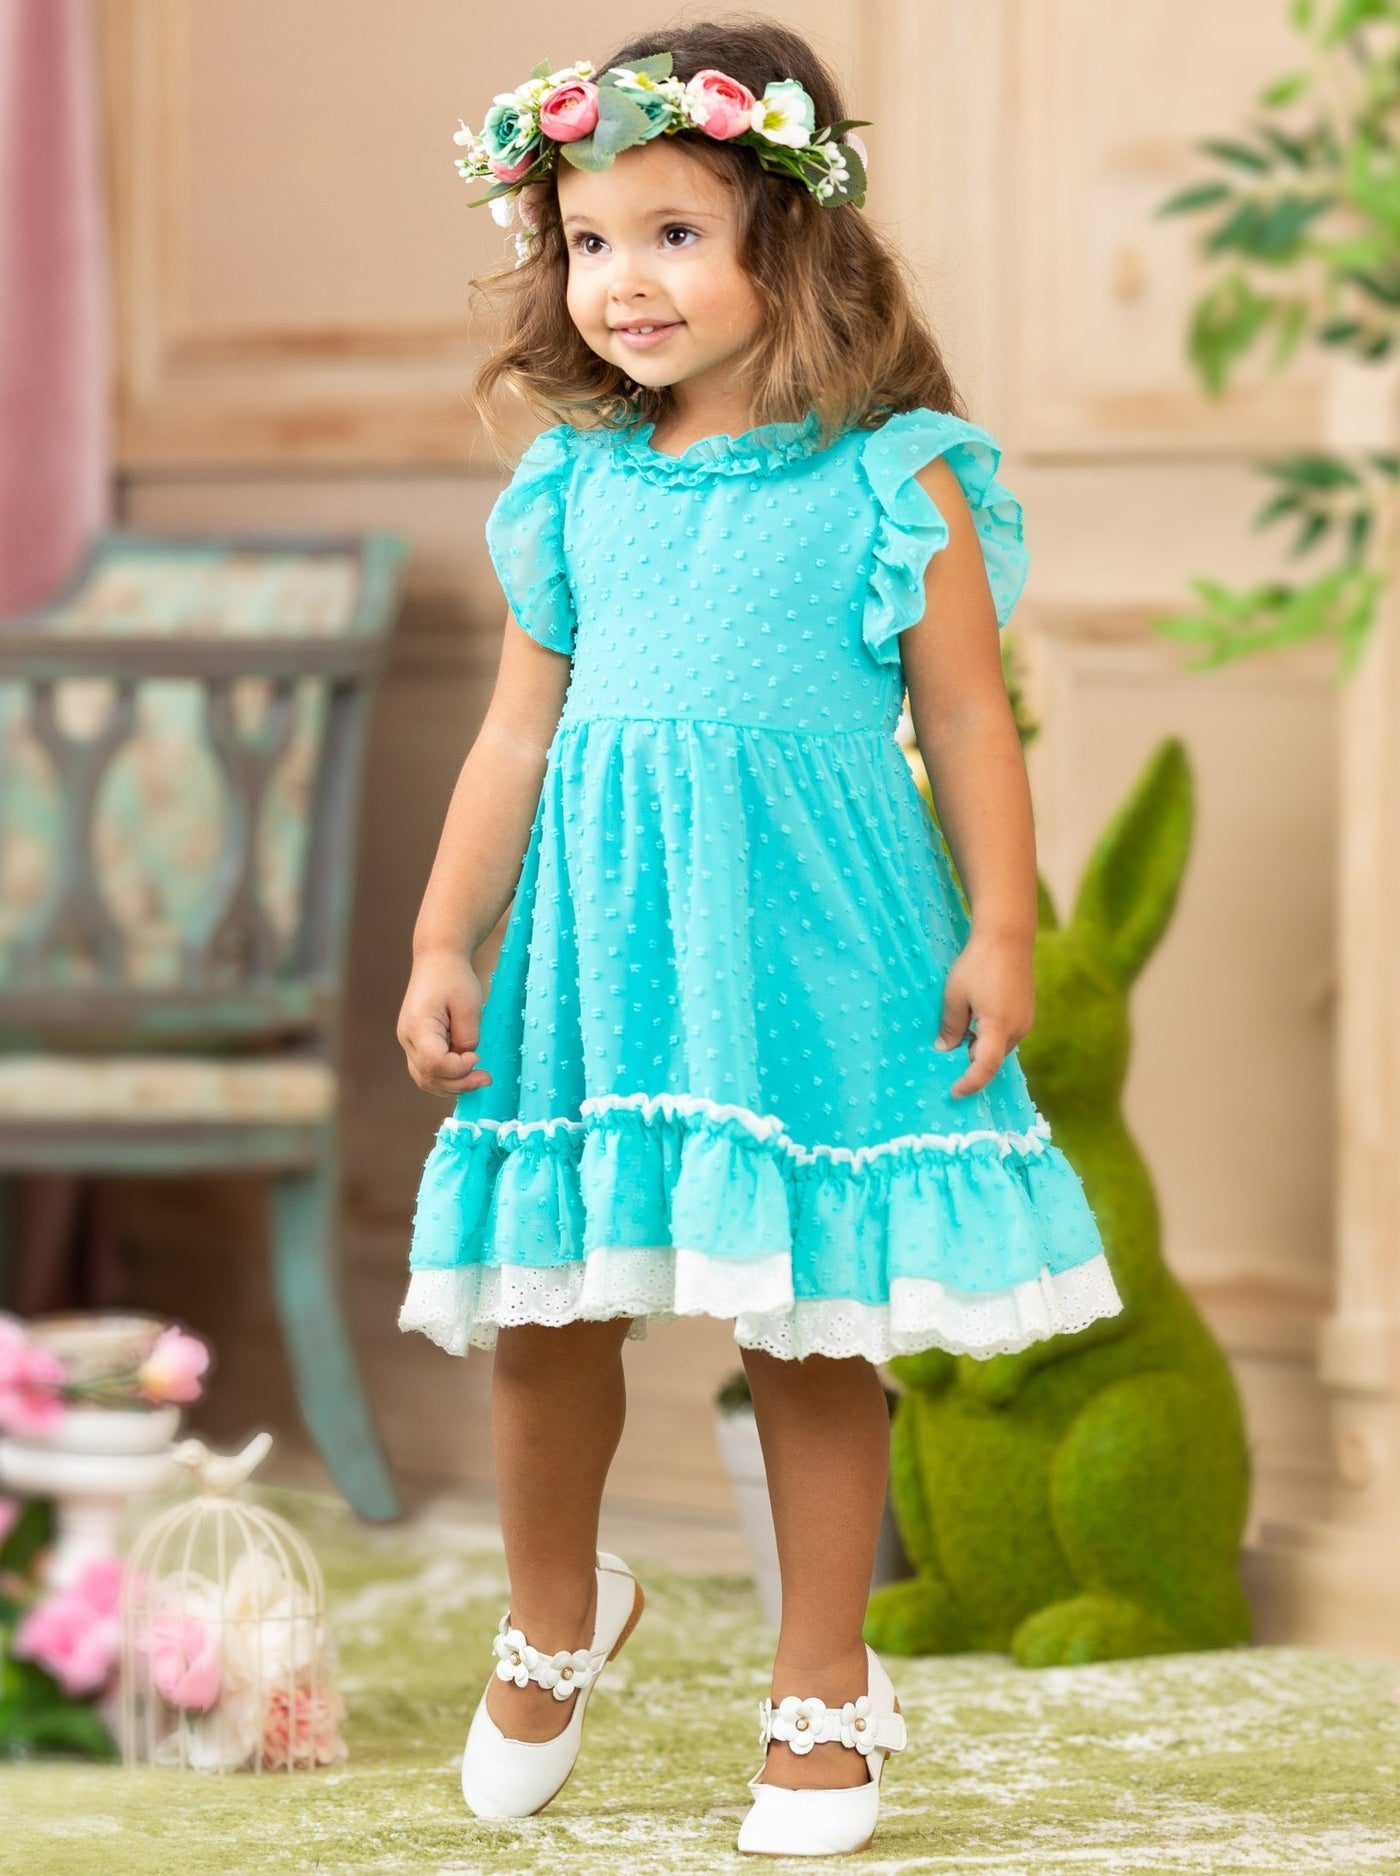 Midi summer dress features raised details, flutter sleeves, and a lace trim - Blue - 2T to 10Y for toddlers and girls